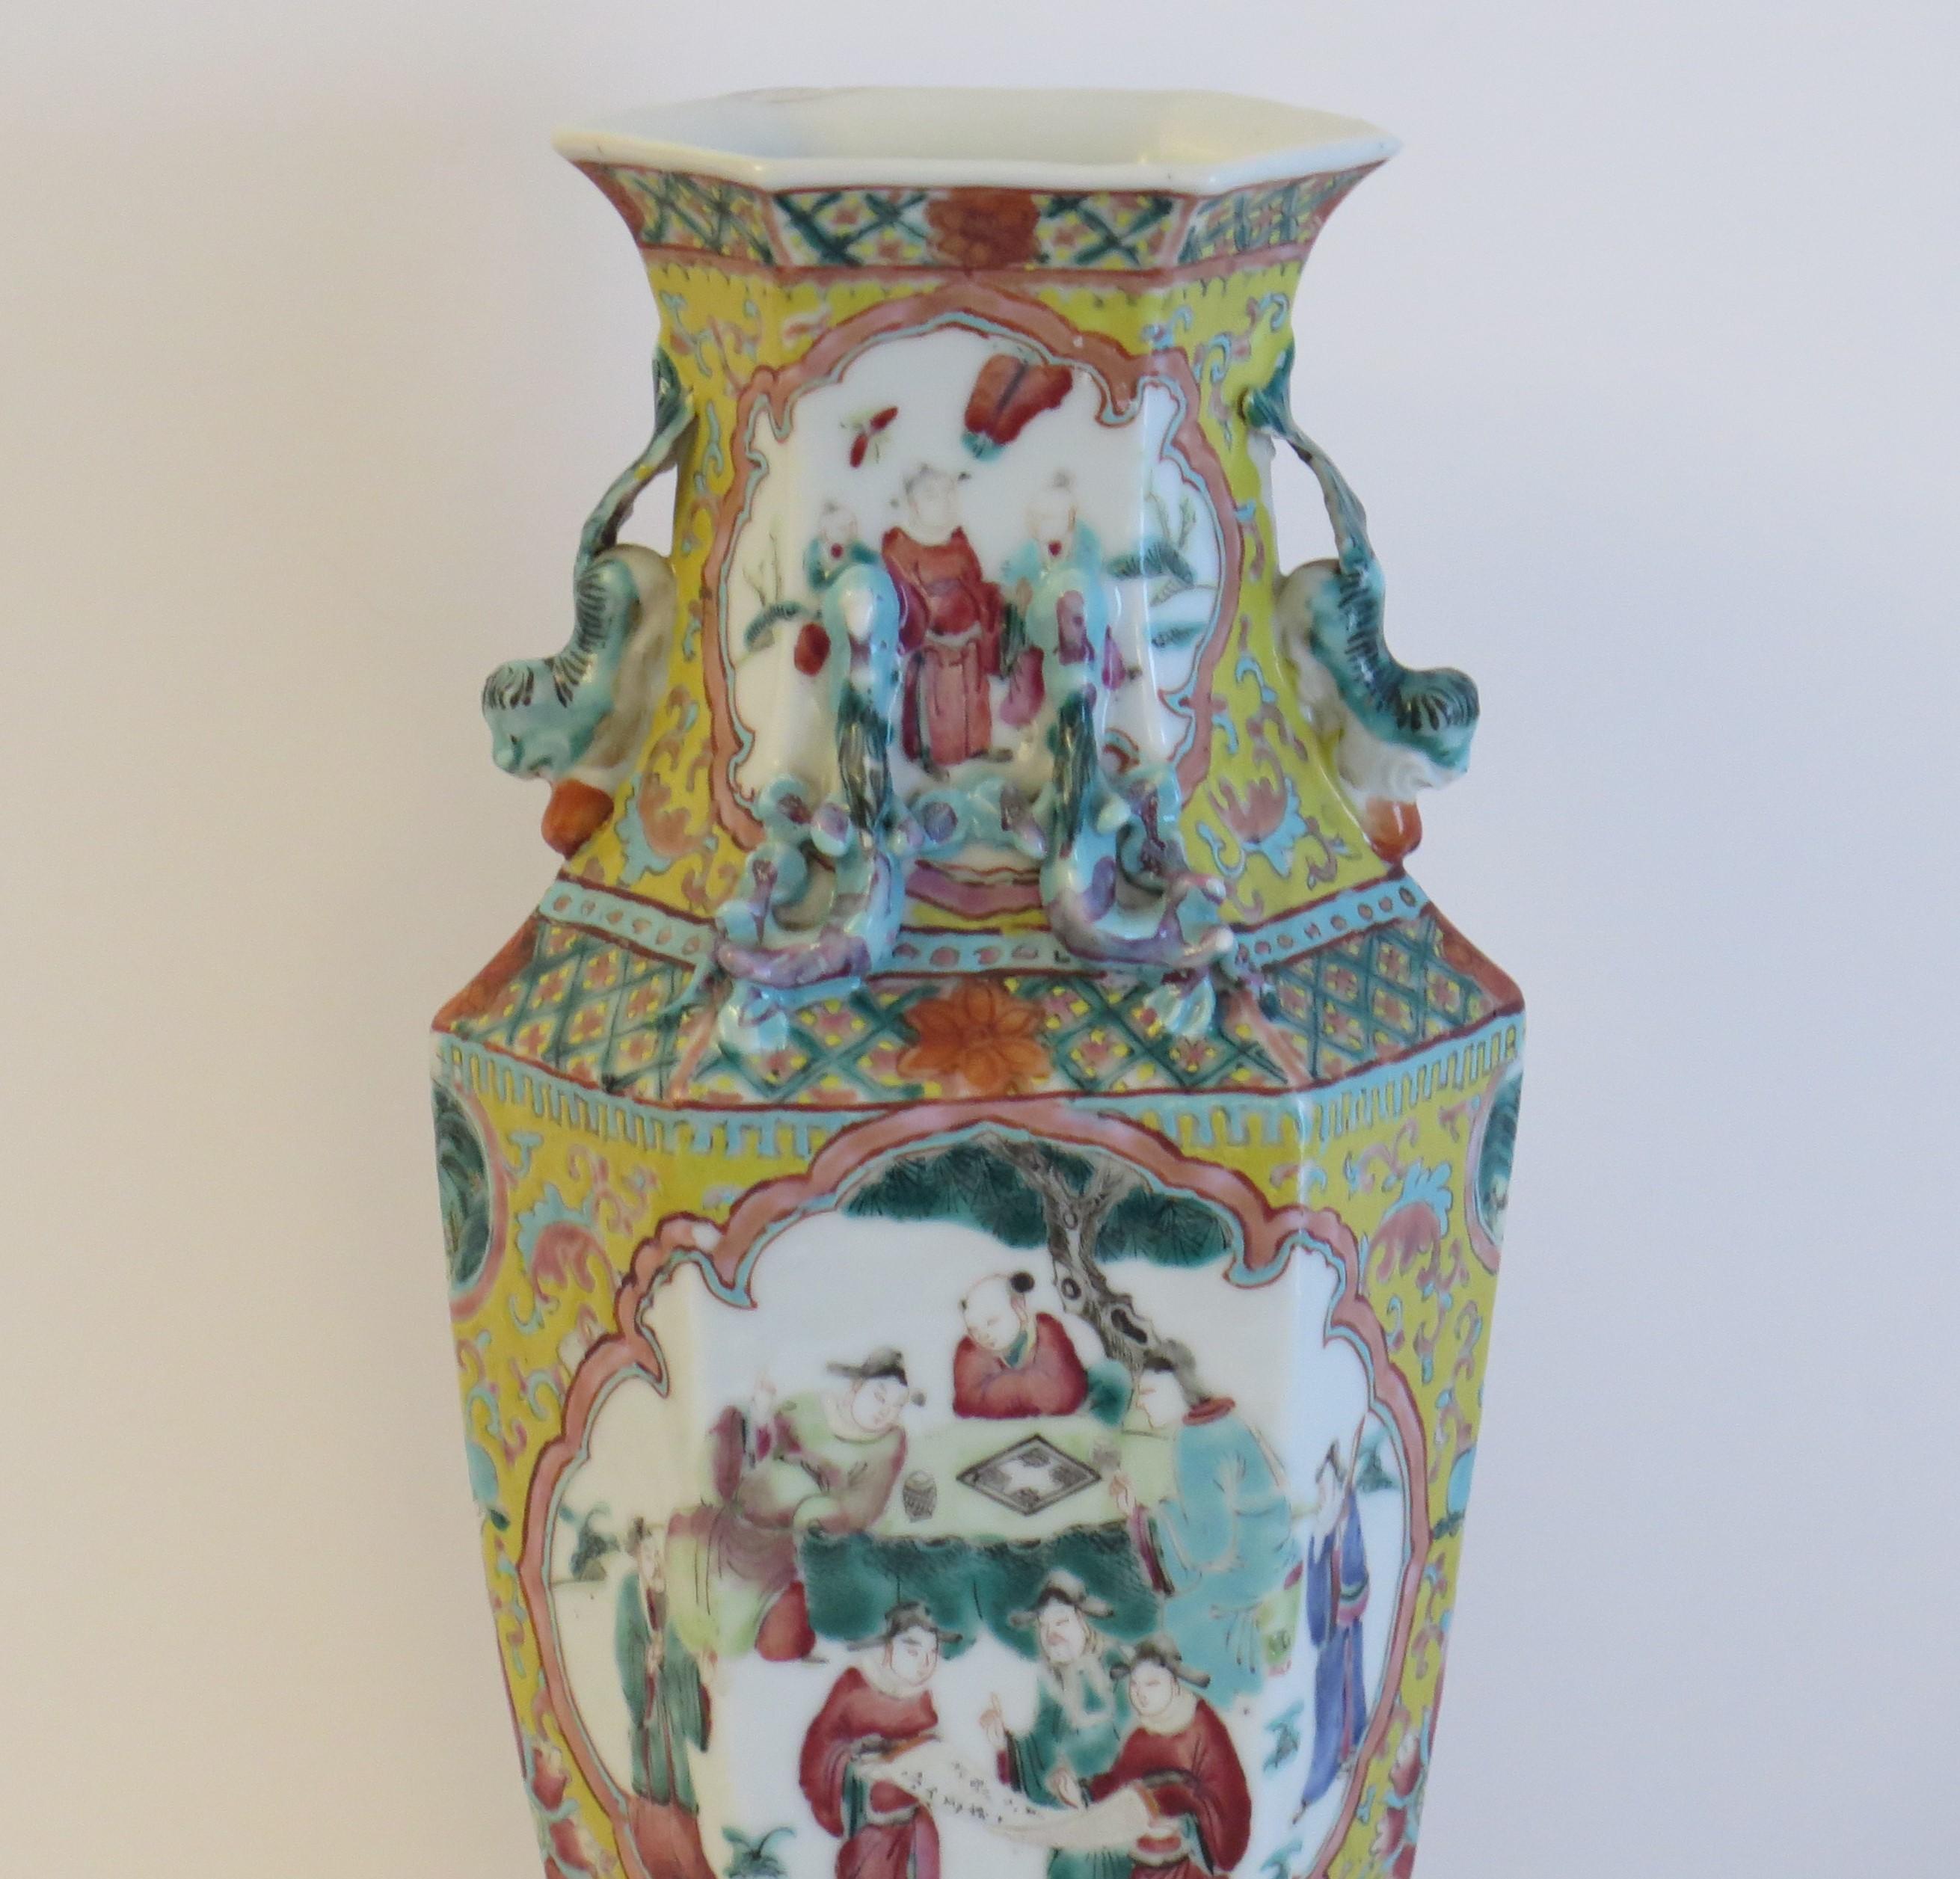 Chinese Export Vase Famille Rose Porcelain, Late Qing or Early Republic Period 8